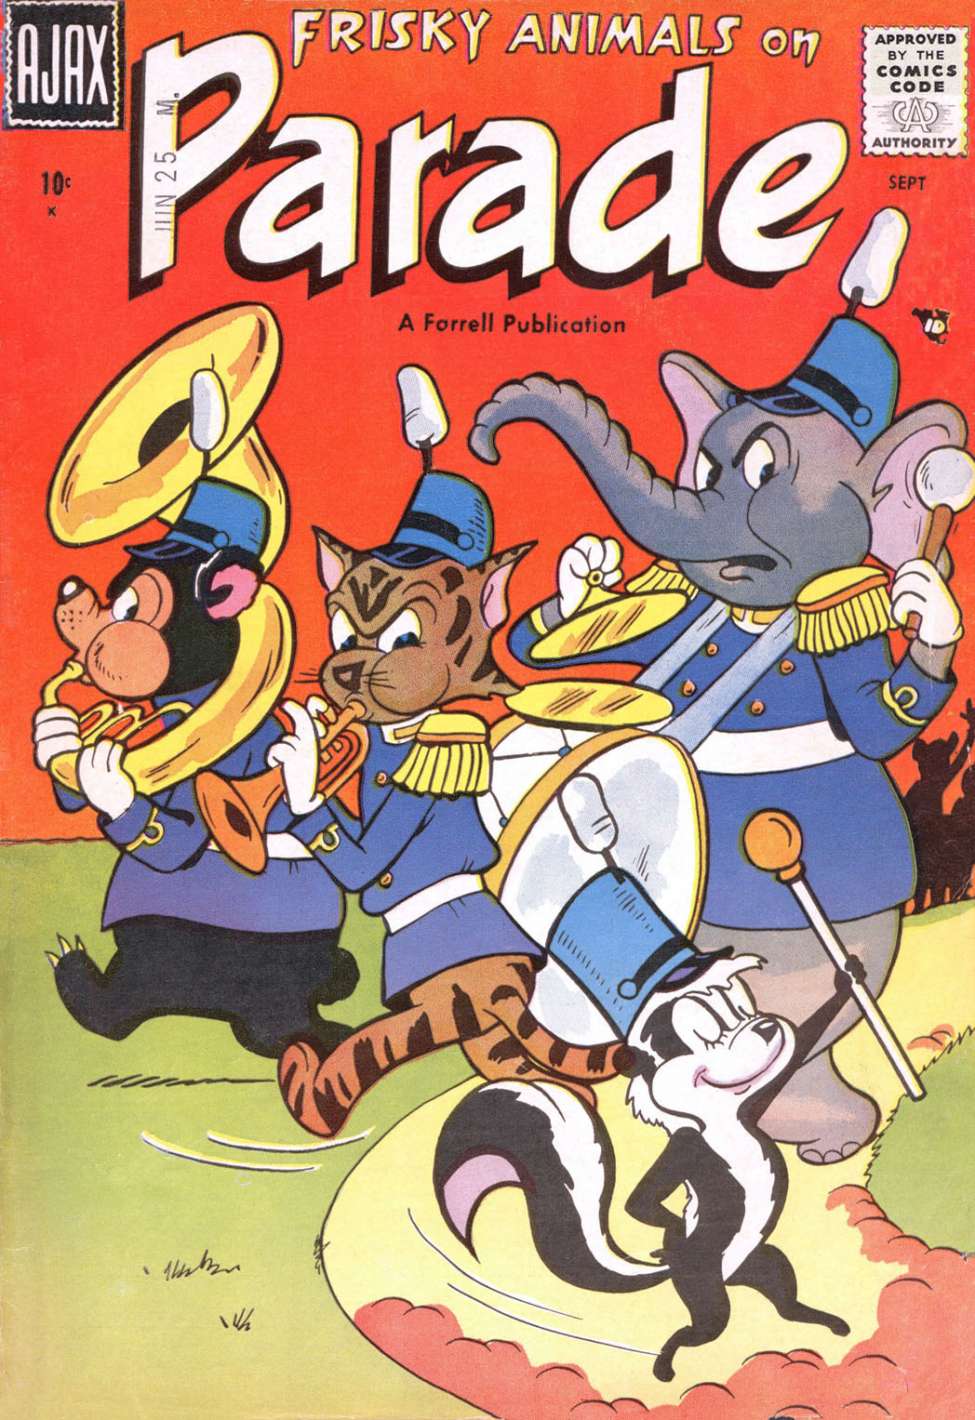 Book Cover For Frisky Animals on Parade 1 - Version 2